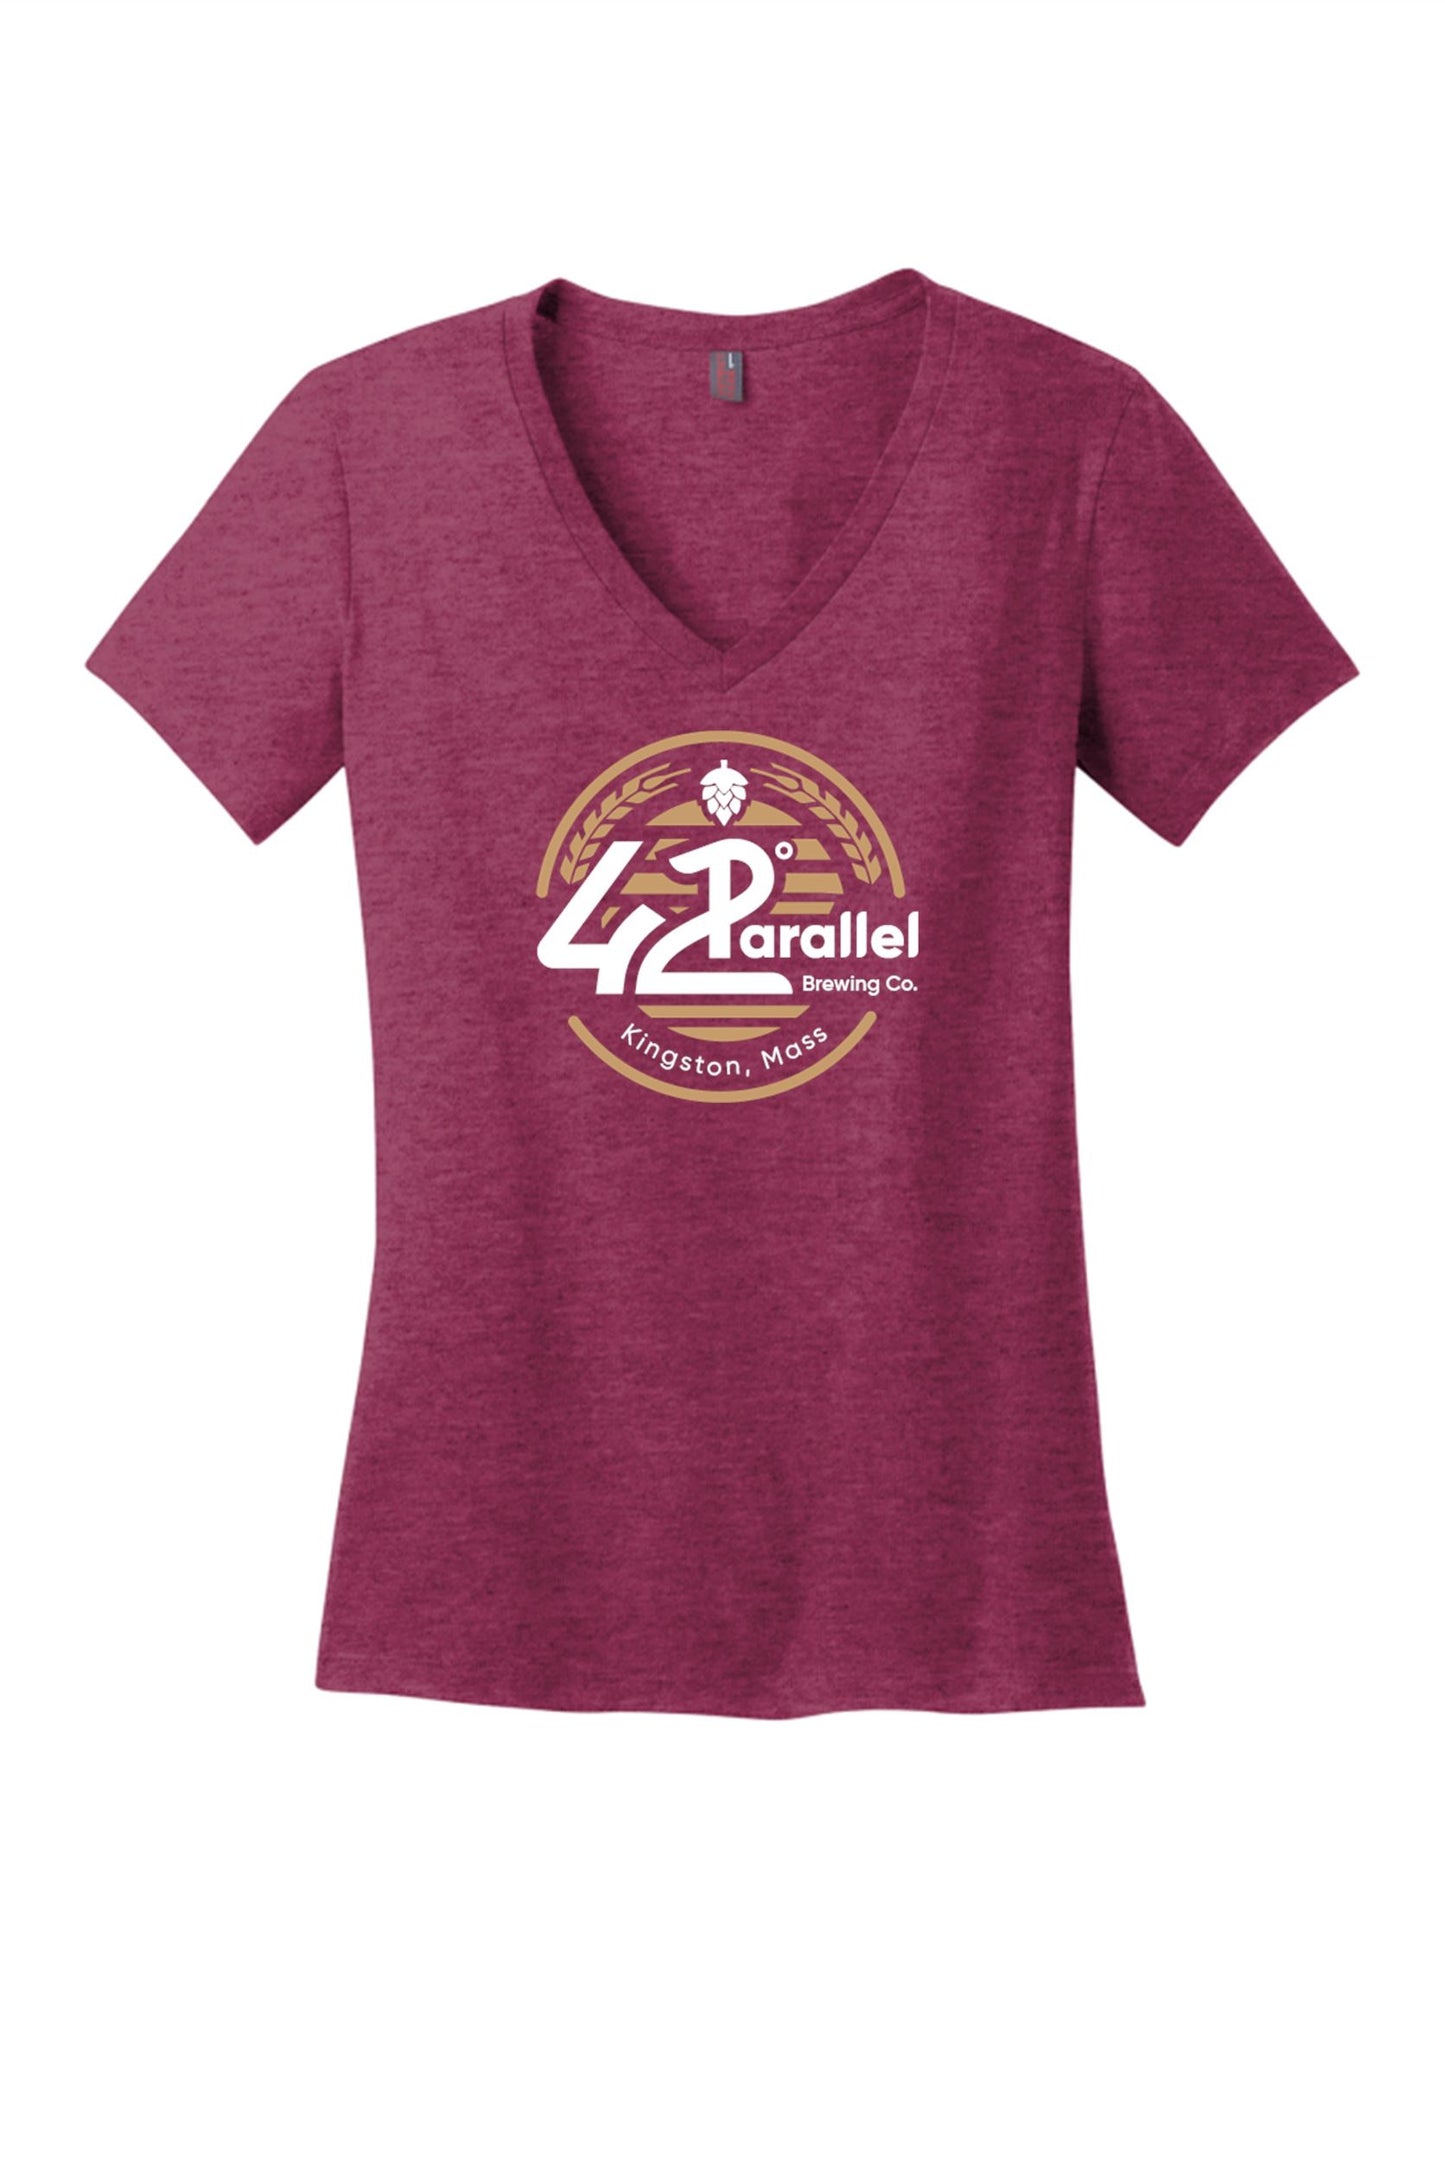 42 Parallel Women's Perfect Weight V-Neck